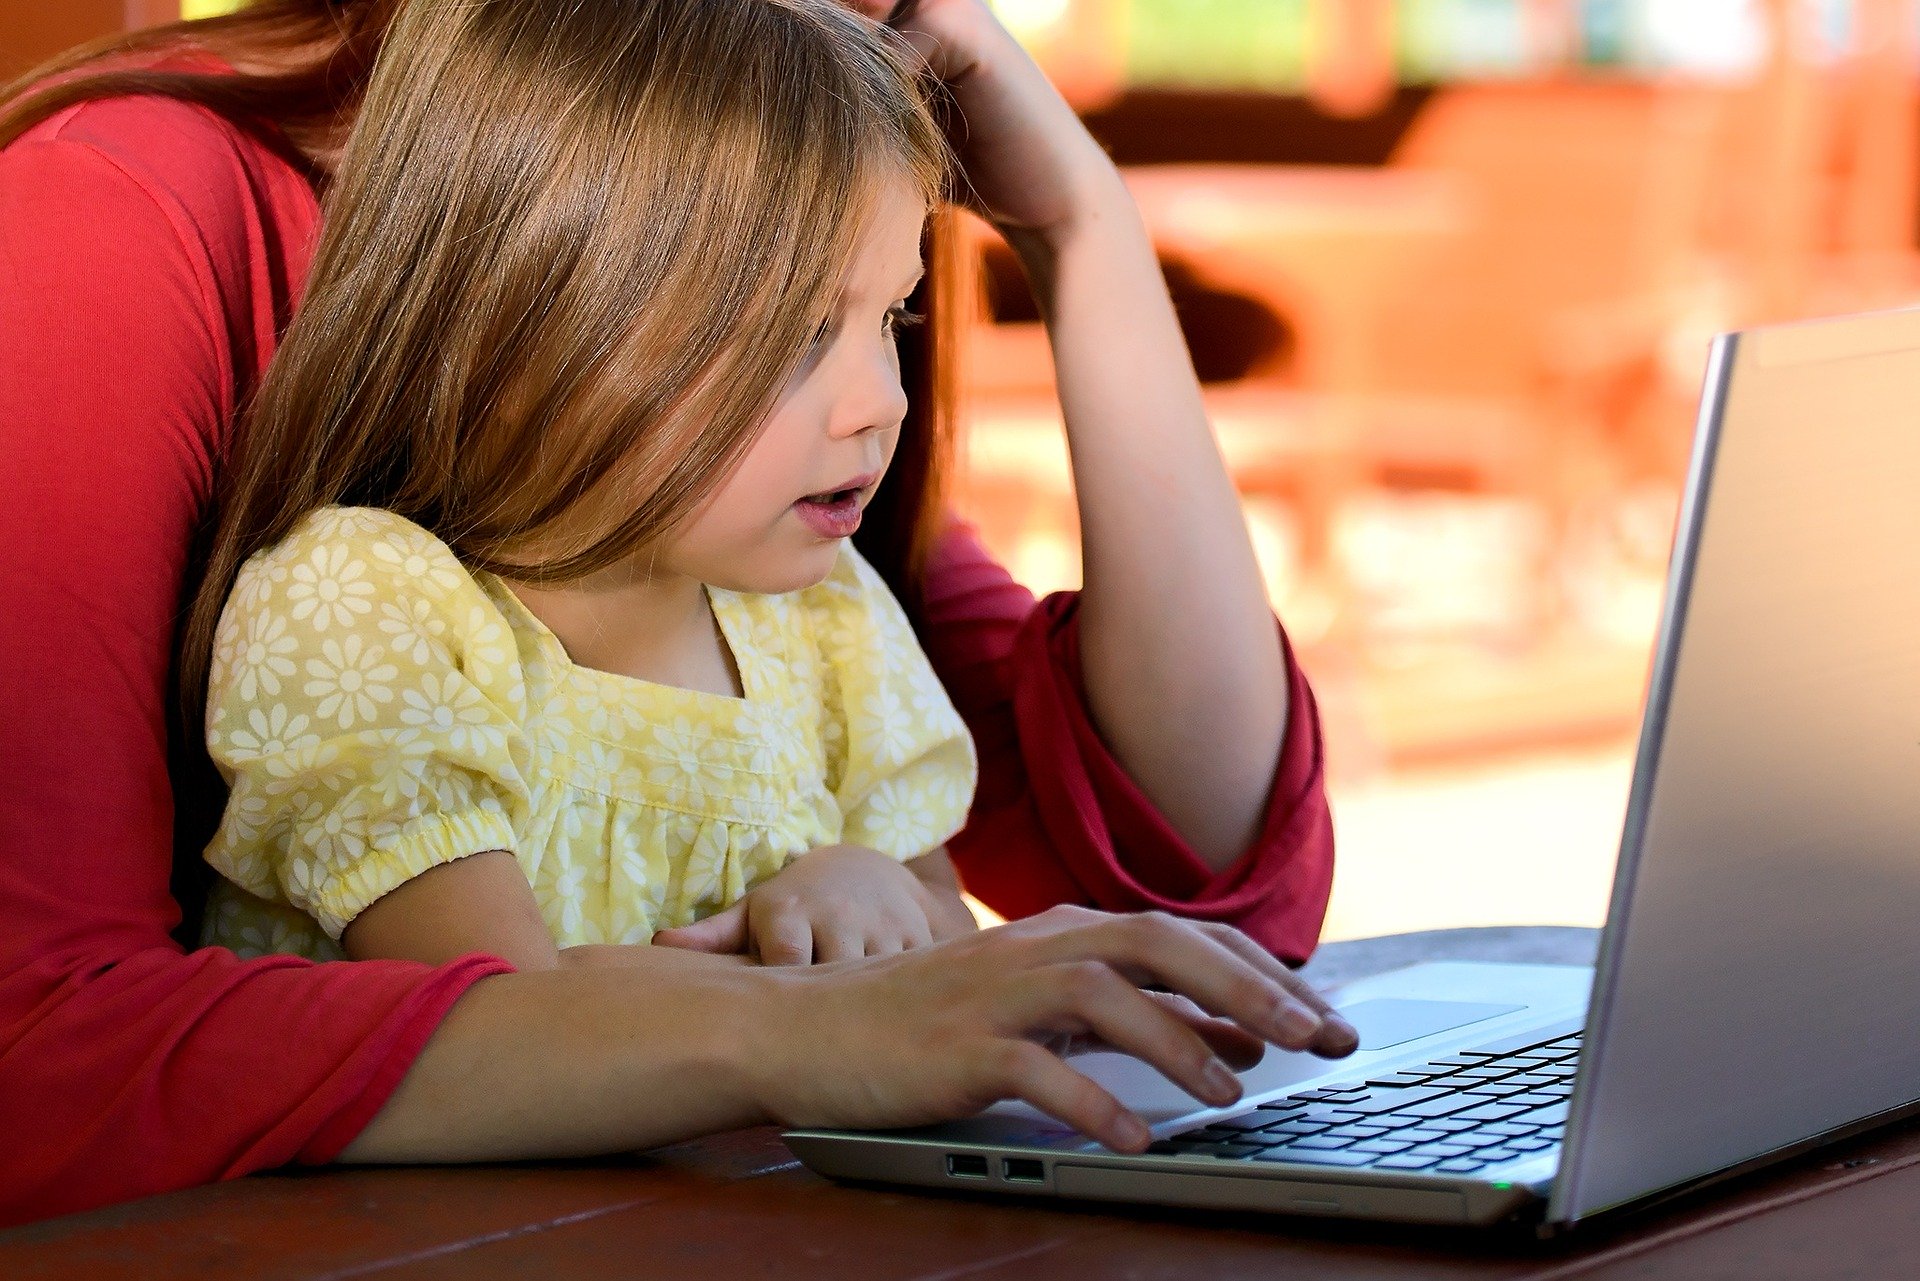 Young girl (with her mother, who is out of view) looking at a screen of a laptop